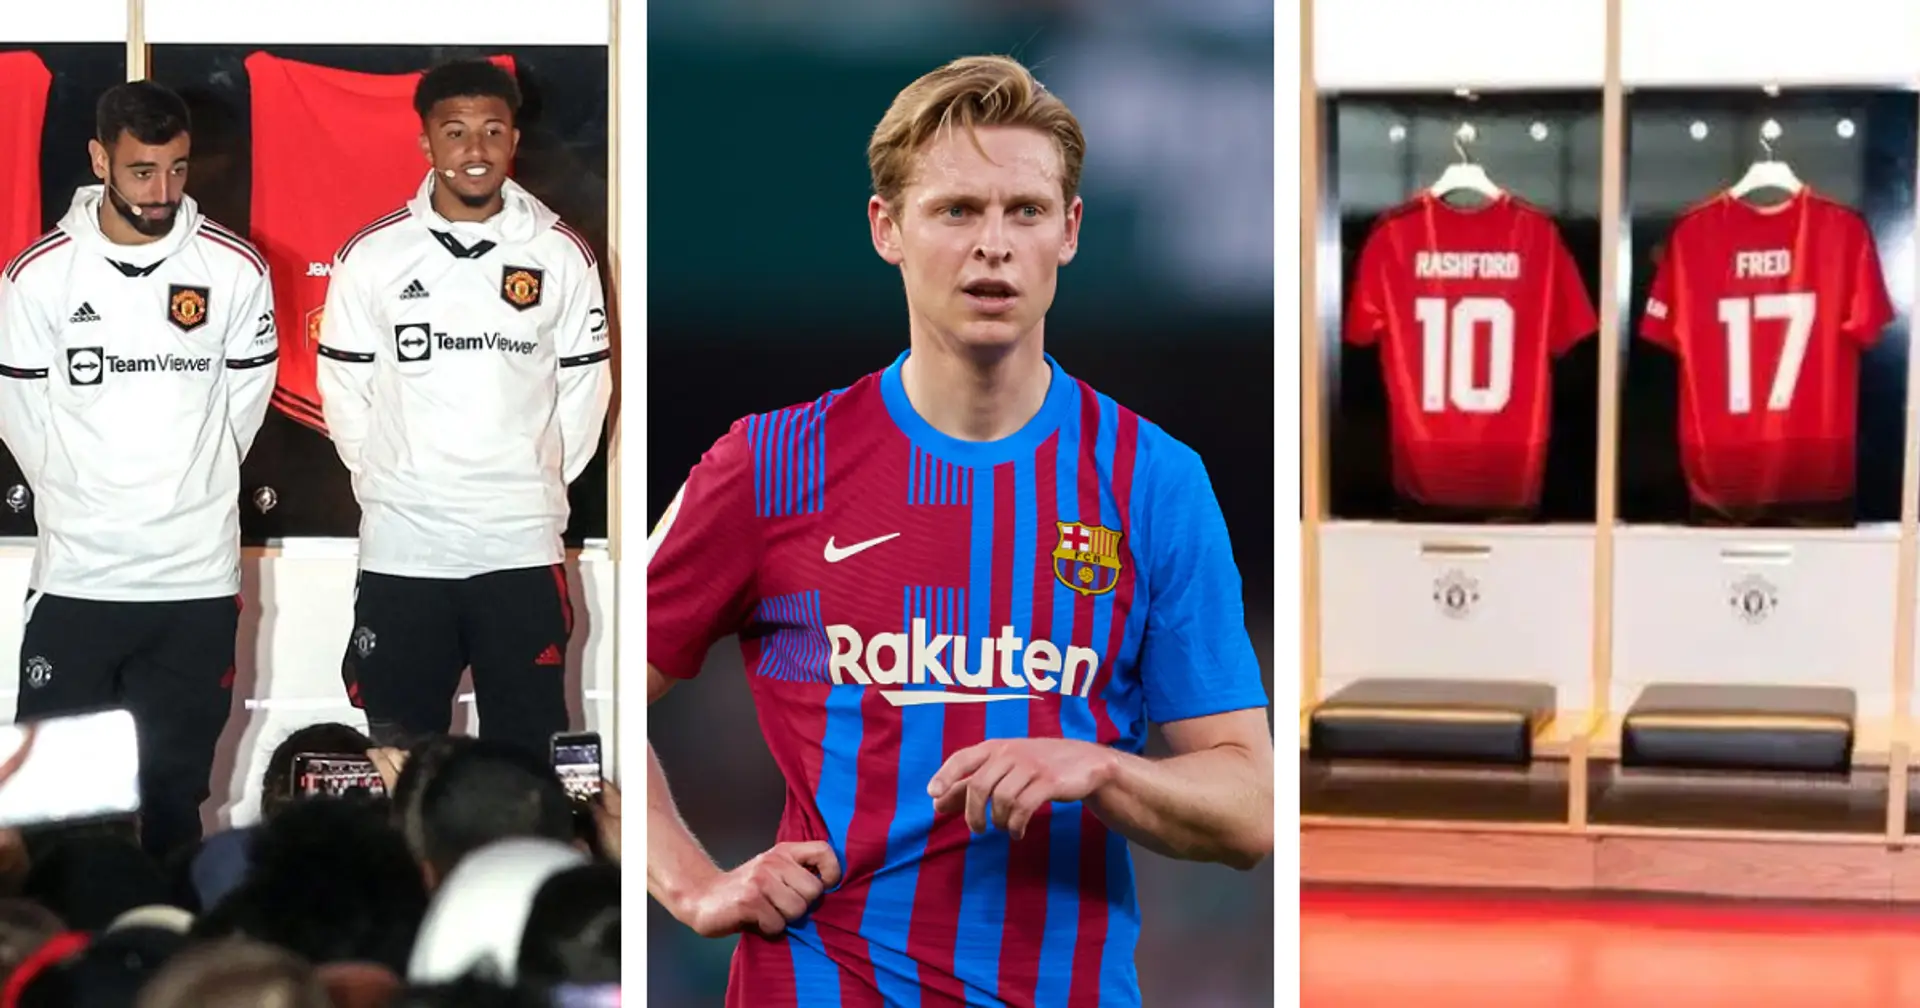 7 more shirt numbers available to potential new Manchester United signings